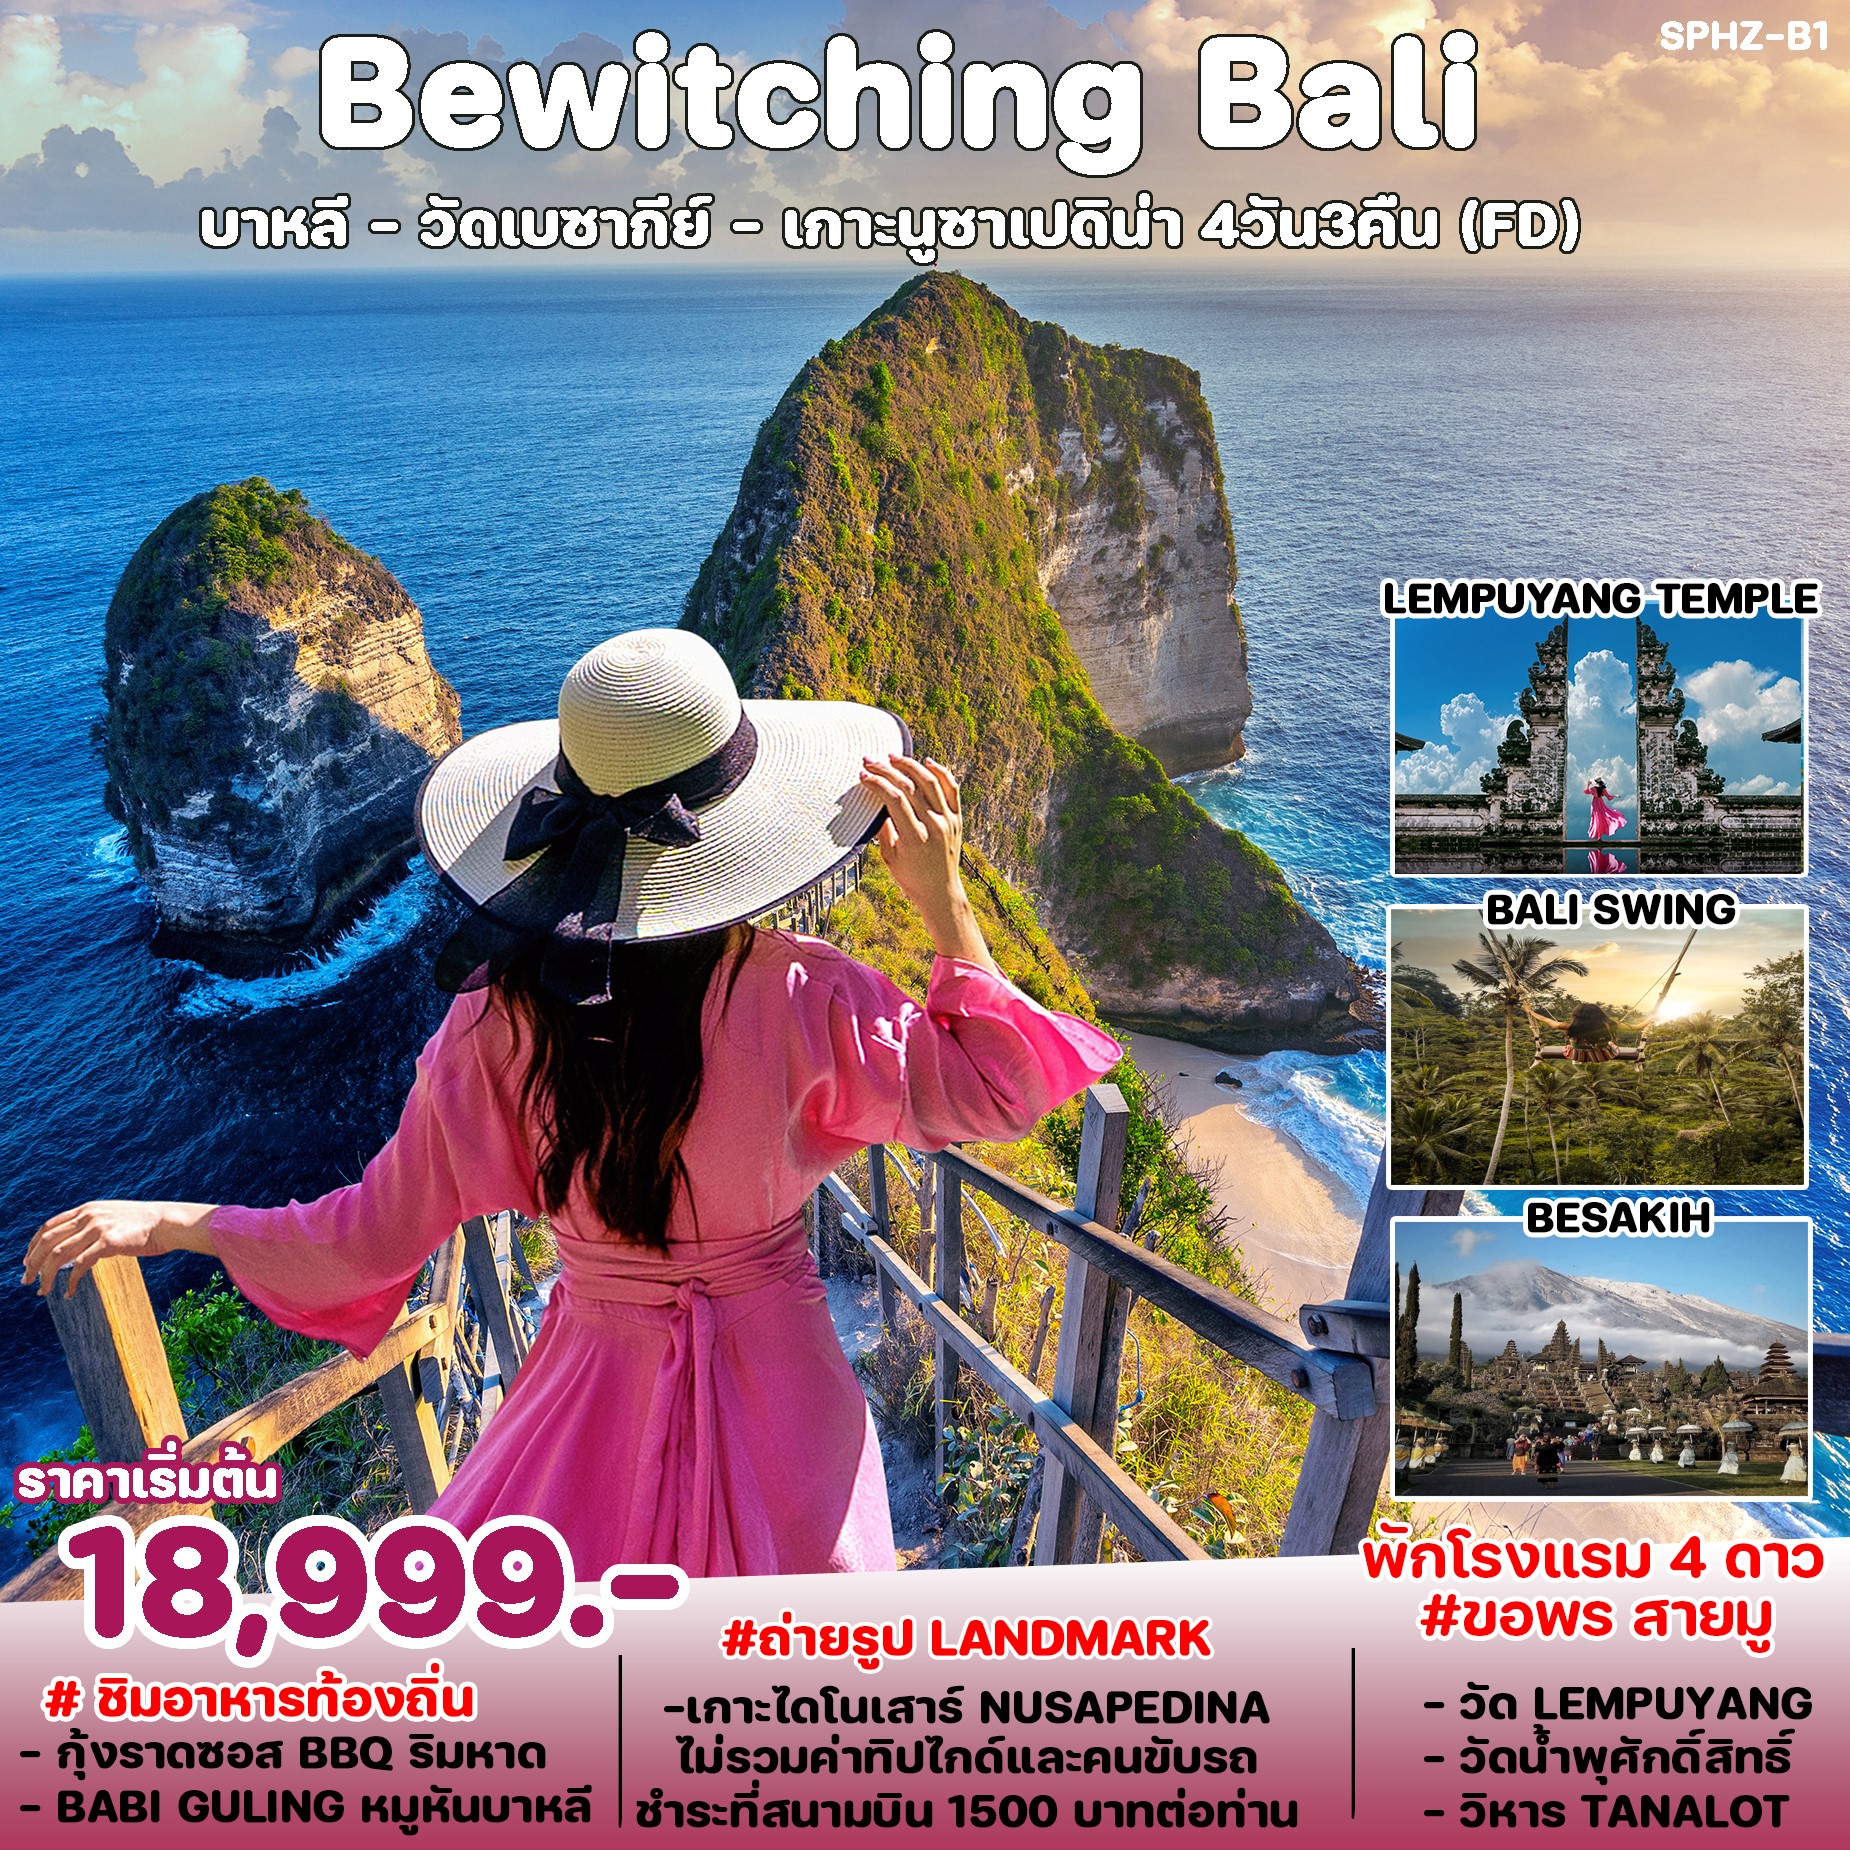 Bewitching Bali 4D3N by FD